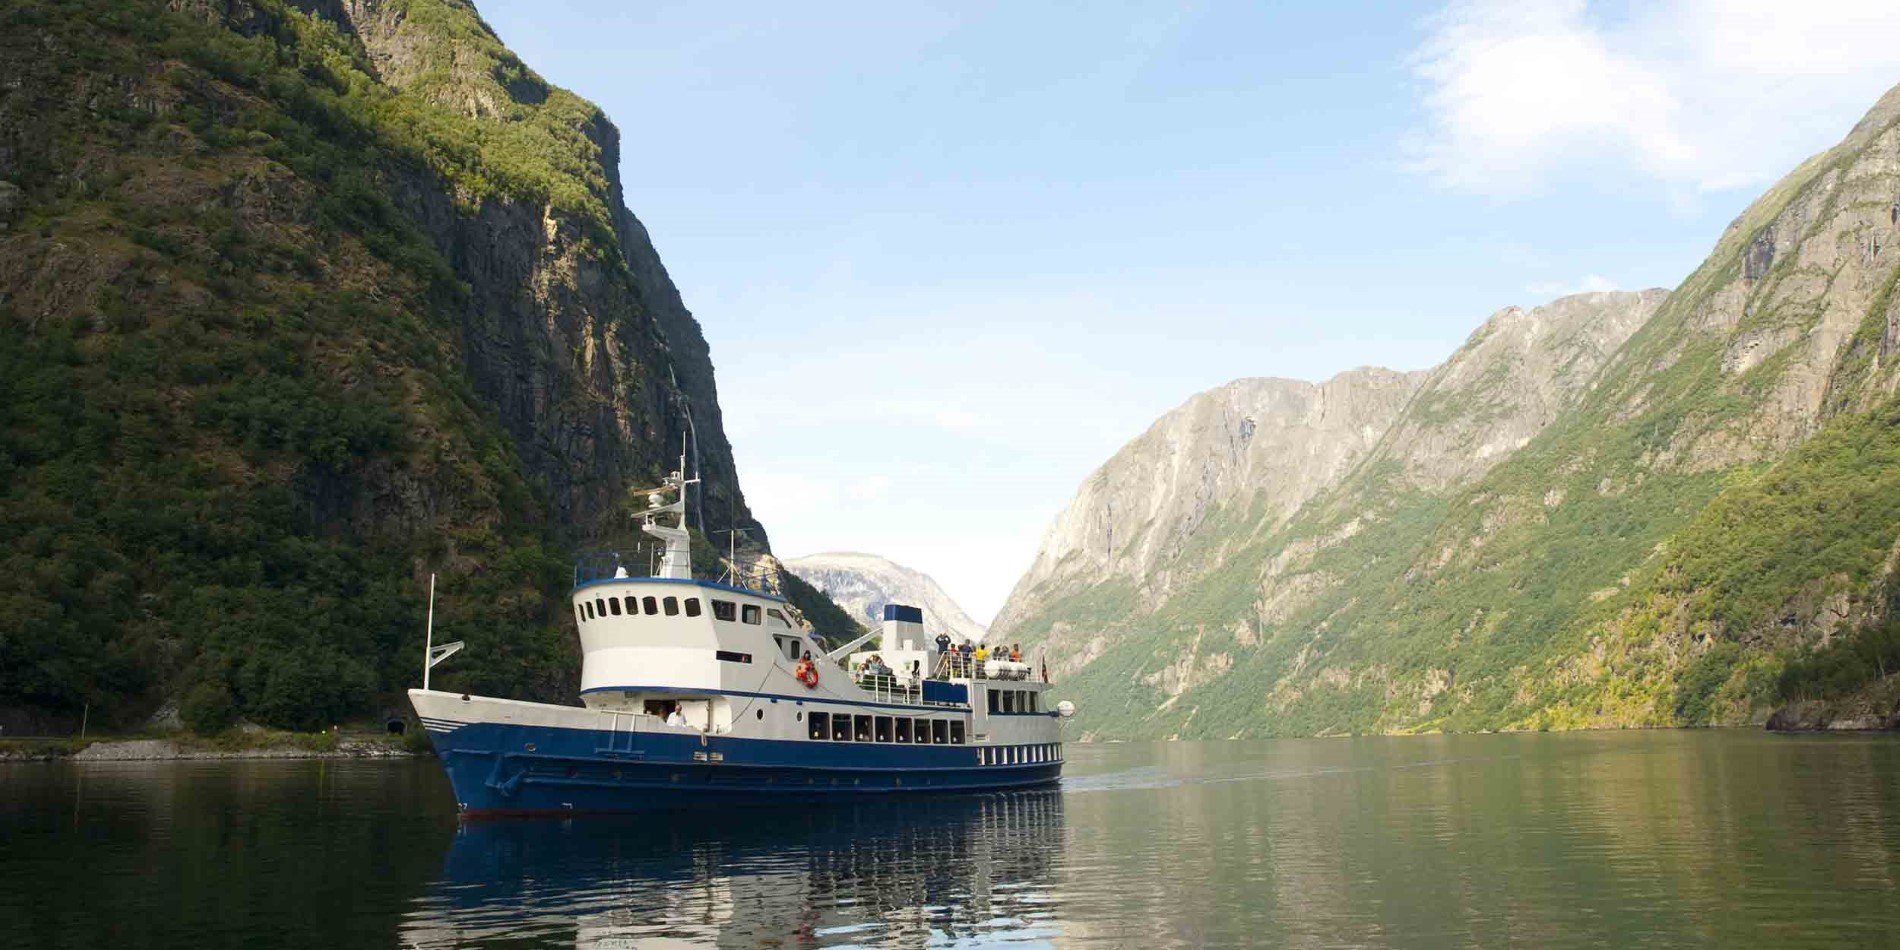 The boat will take you on a journey from Gudvangen to Flåm via the Nærøyfjord on the Norway in a Nutshell tour 